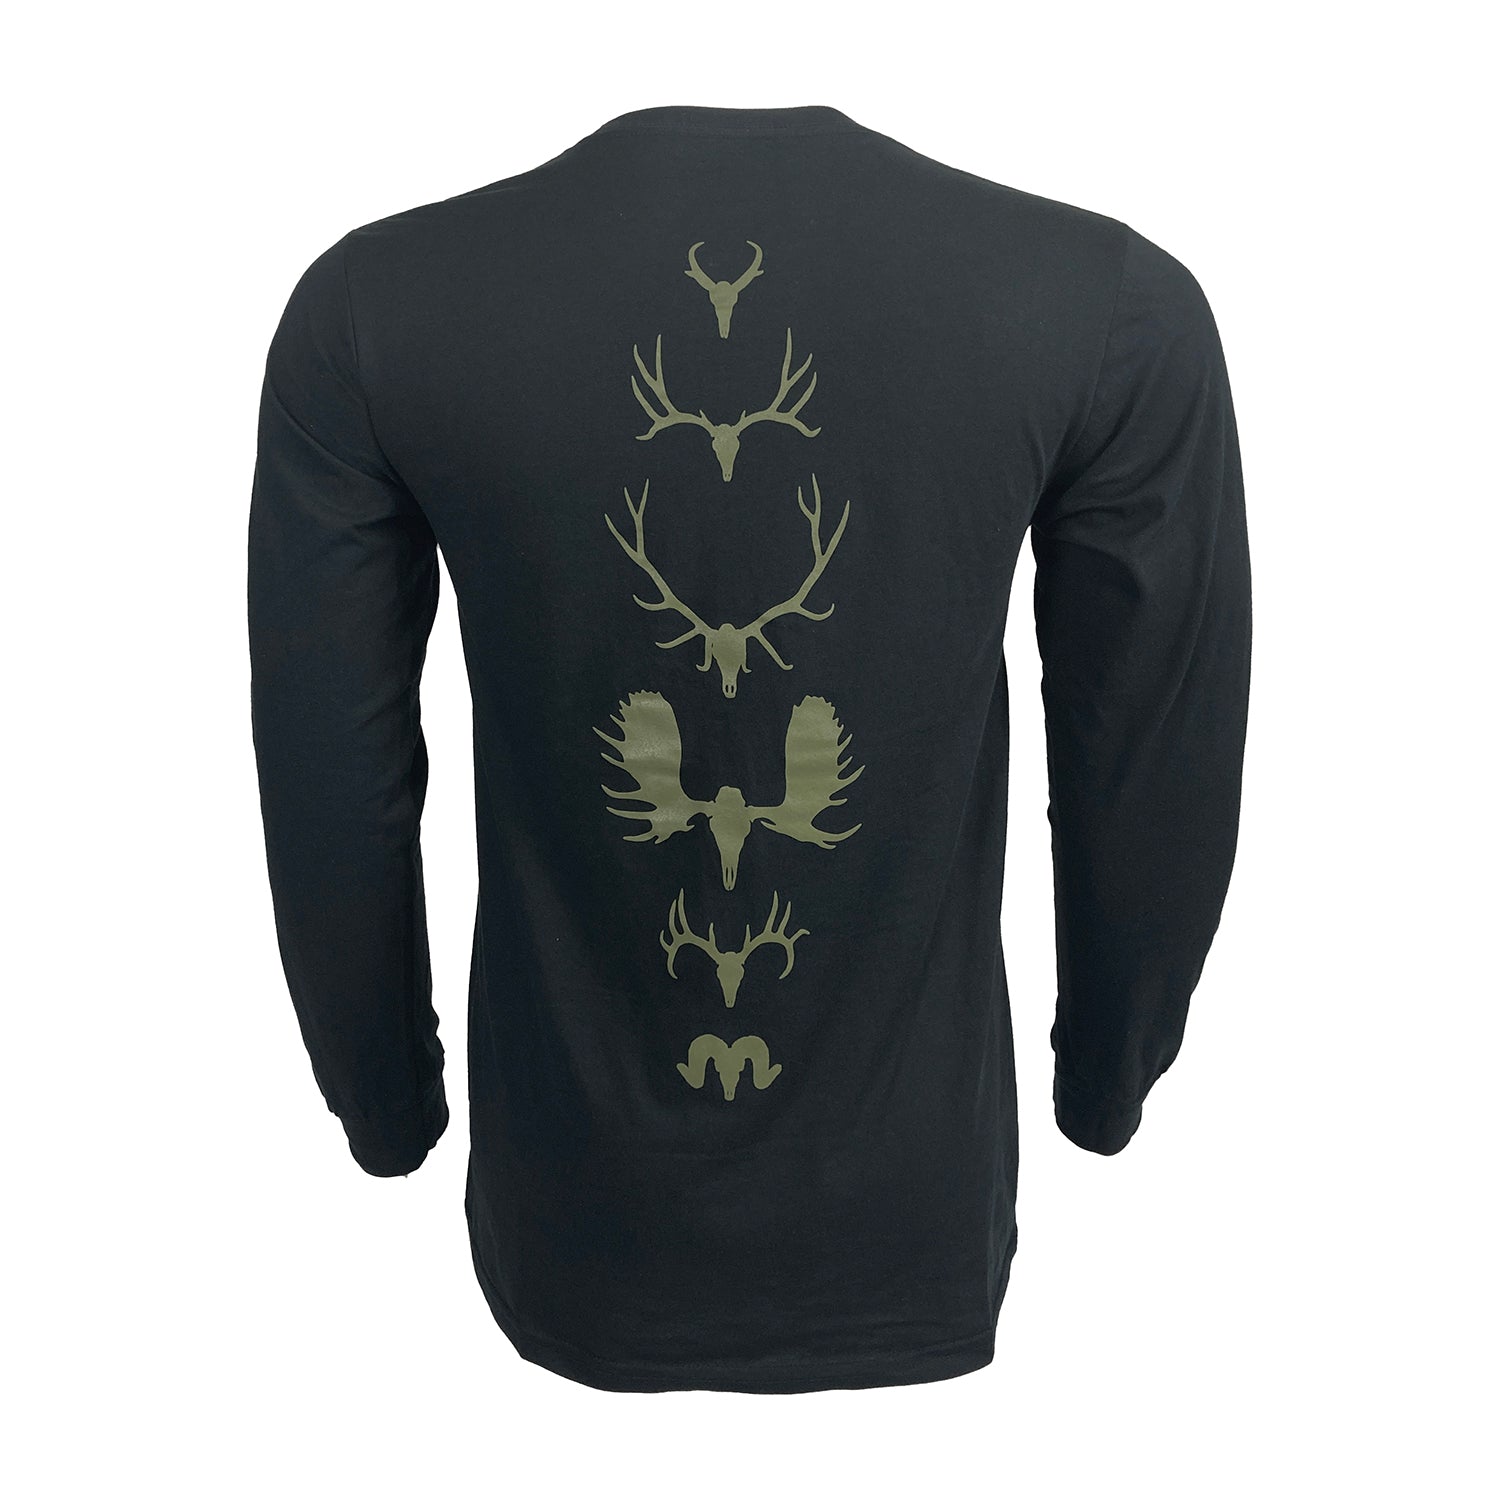 black long sleeved tee pictured from the rear with olive antlered skull silhouettes down the spine.